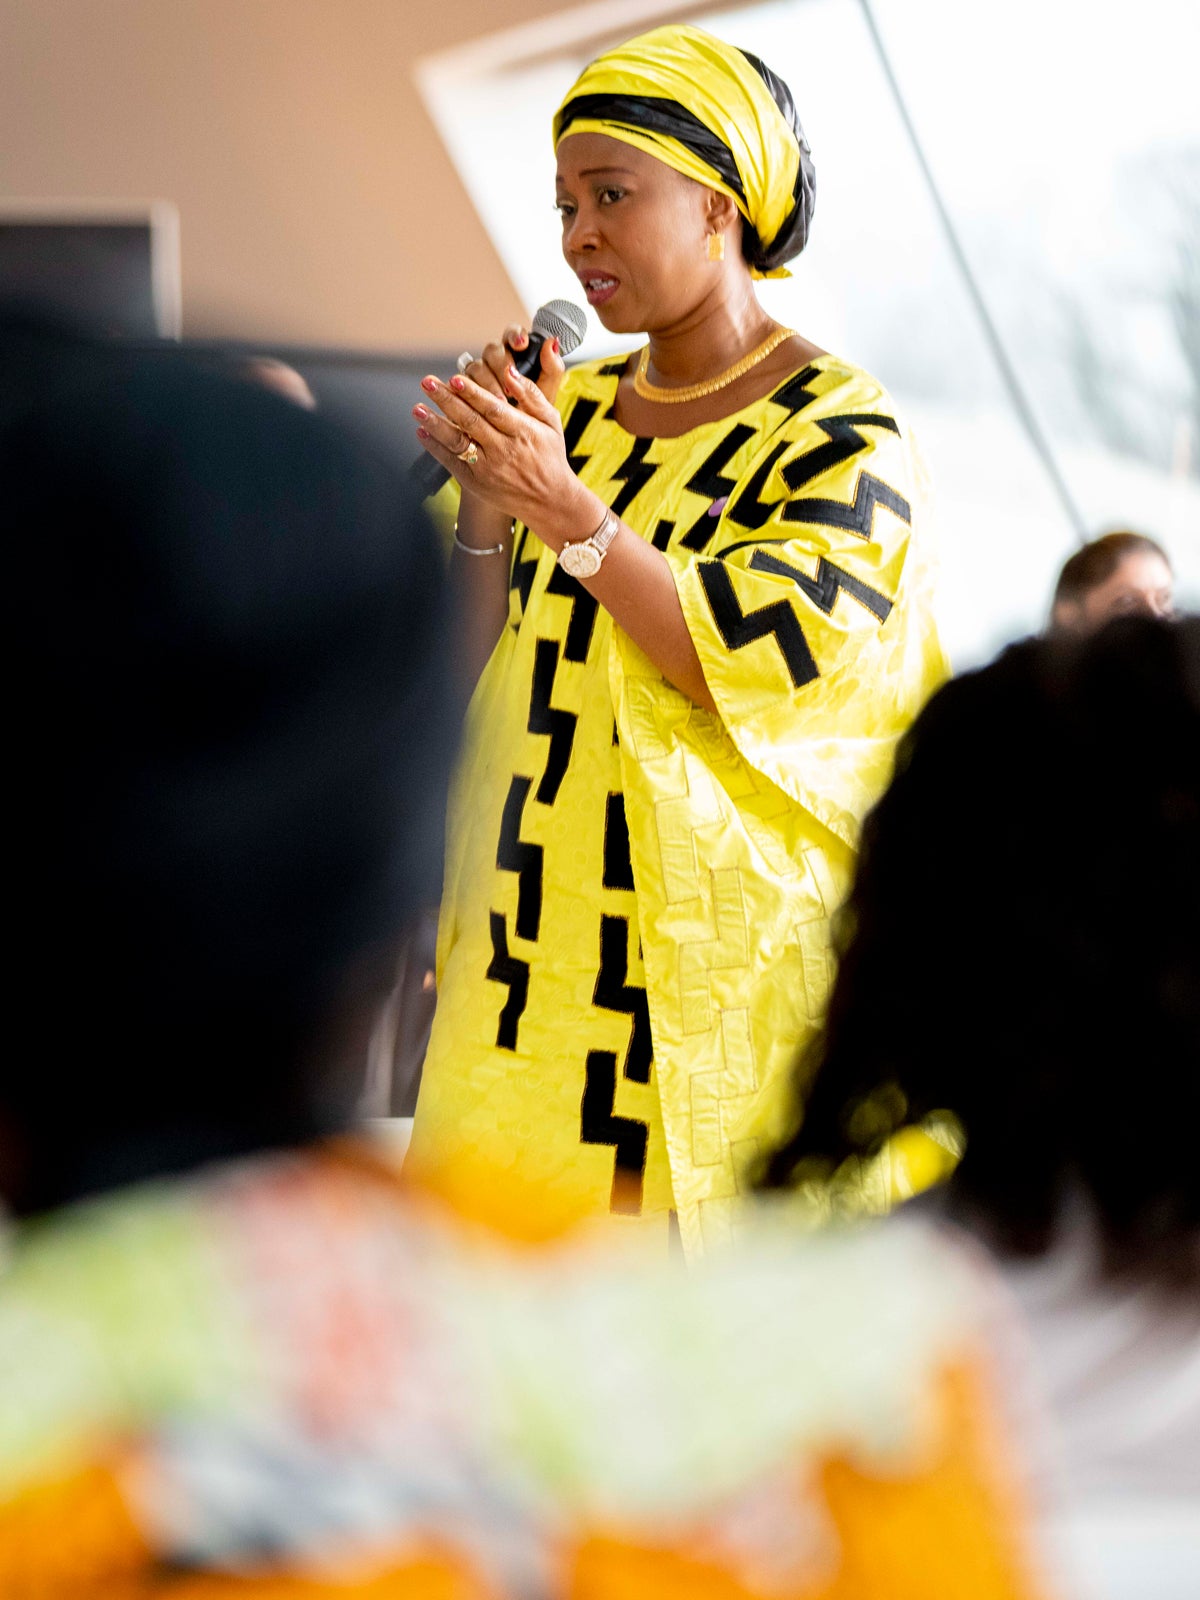 Fatima Maada Bio speaks into a microphone to a group of people. She is wearing a robe and headdress that are both bright yellow with black highlights.